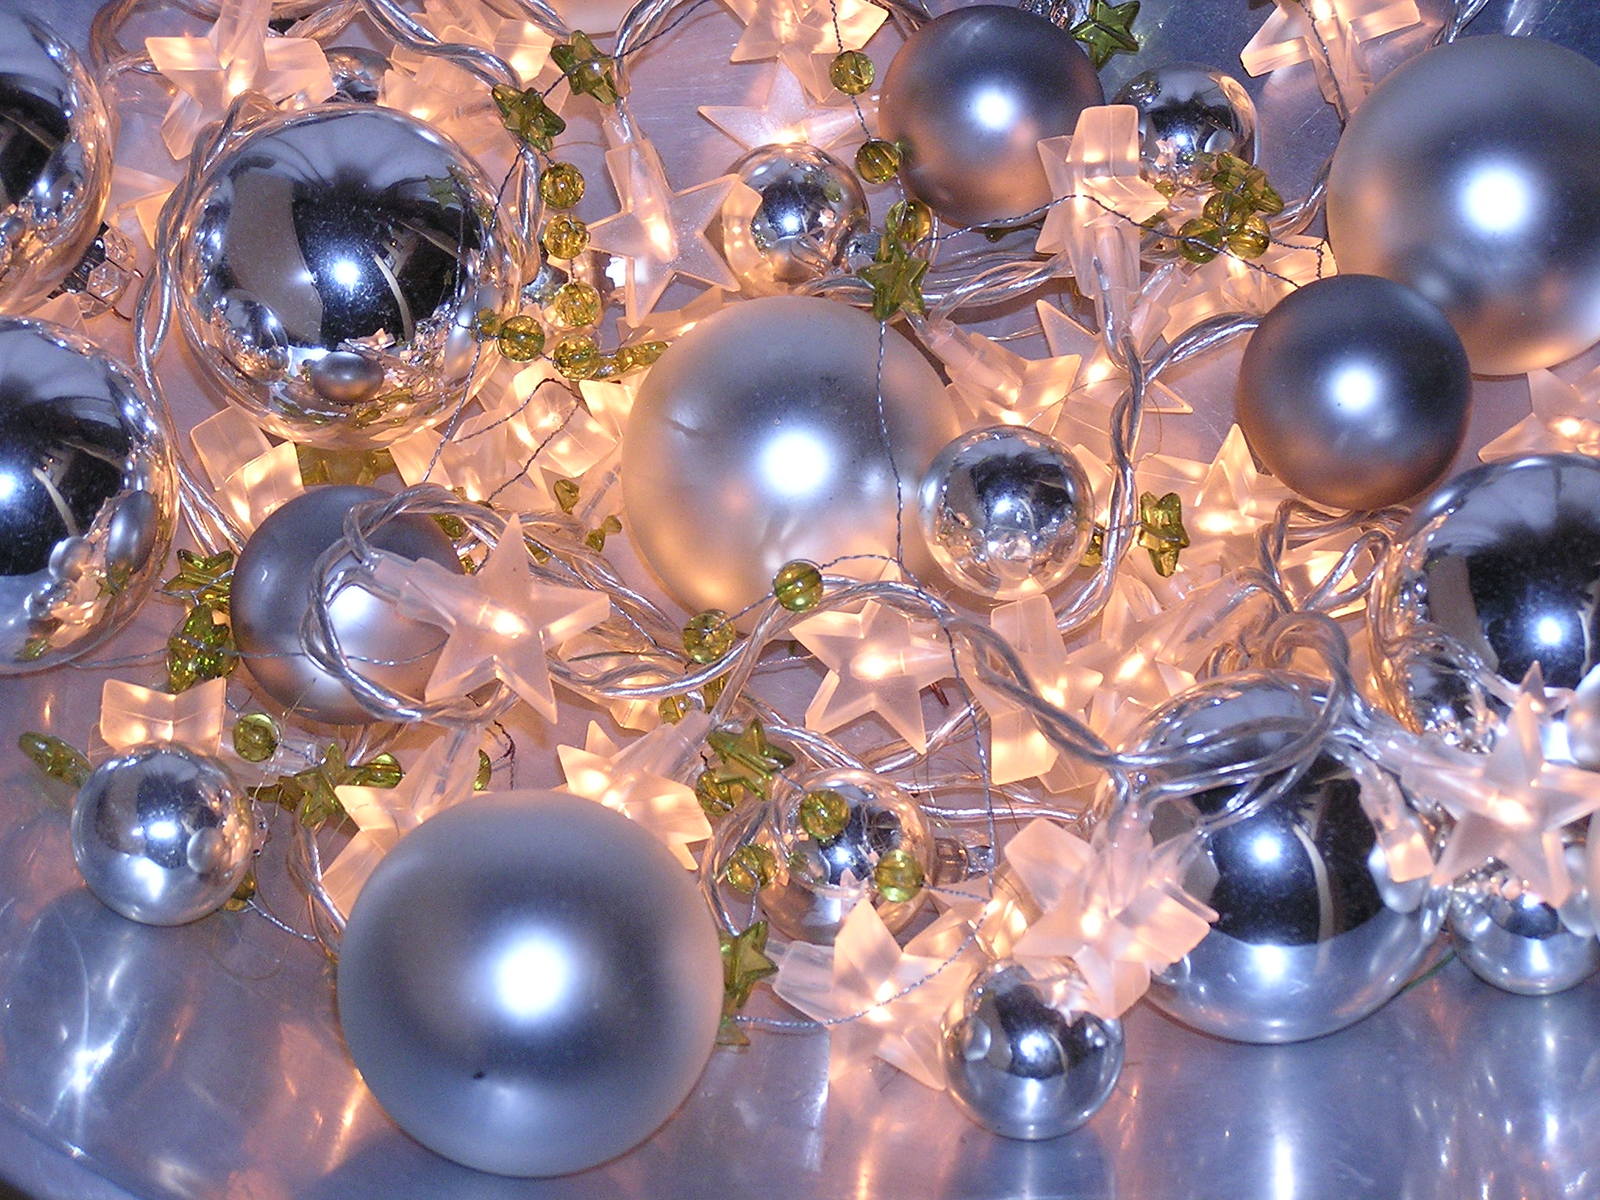 an assortment of silver ornaments on a tray